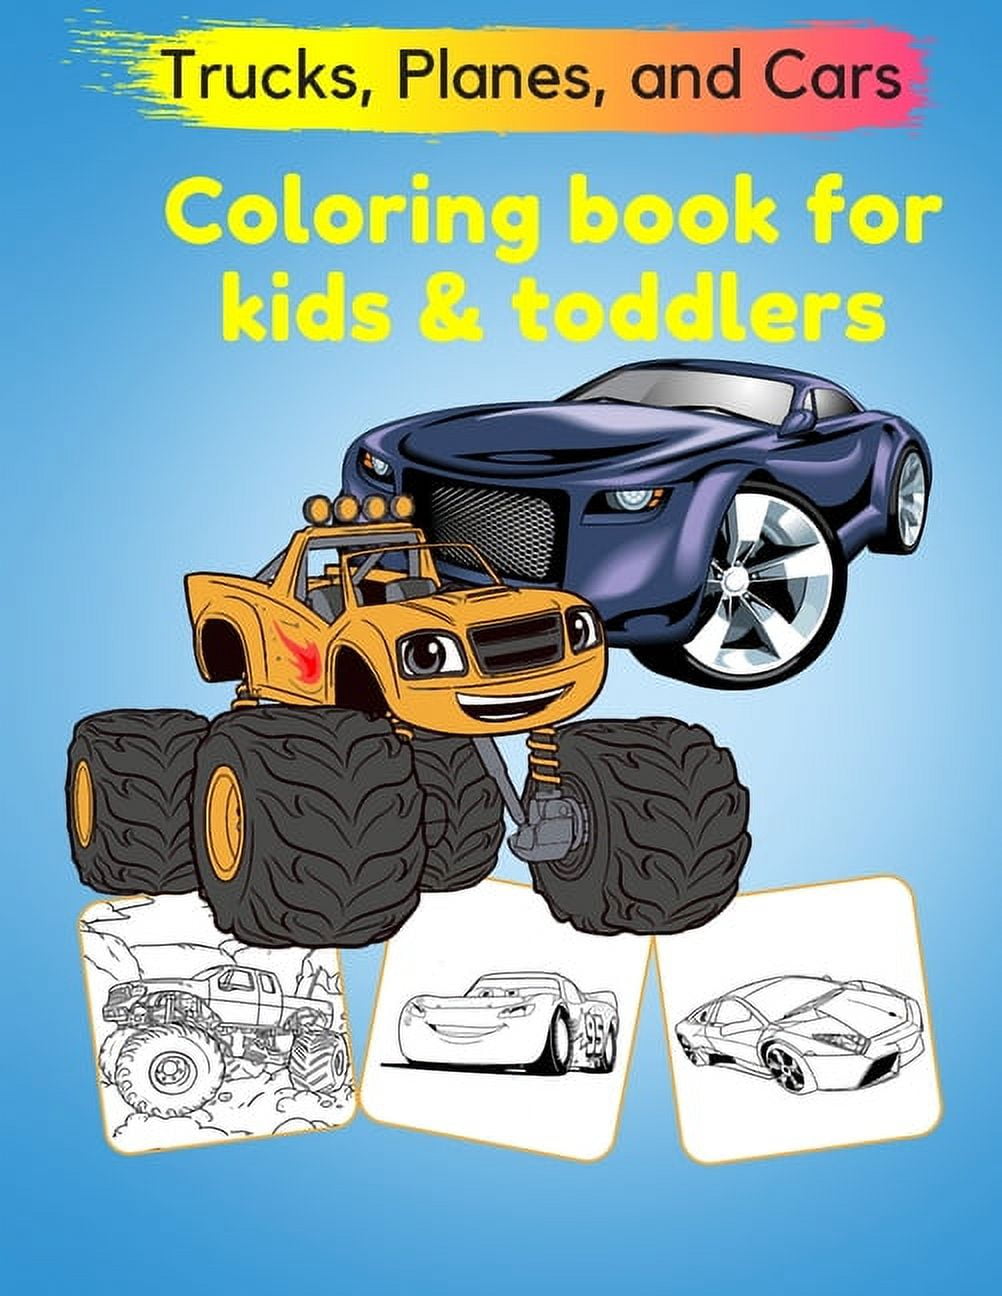 Cars, Trucks, Planes, and More! Dot Markers Activity Book for Toddlers:  Creative Coloring Book for Kids Ages 1-3 2-4 3-5 by Gracepress